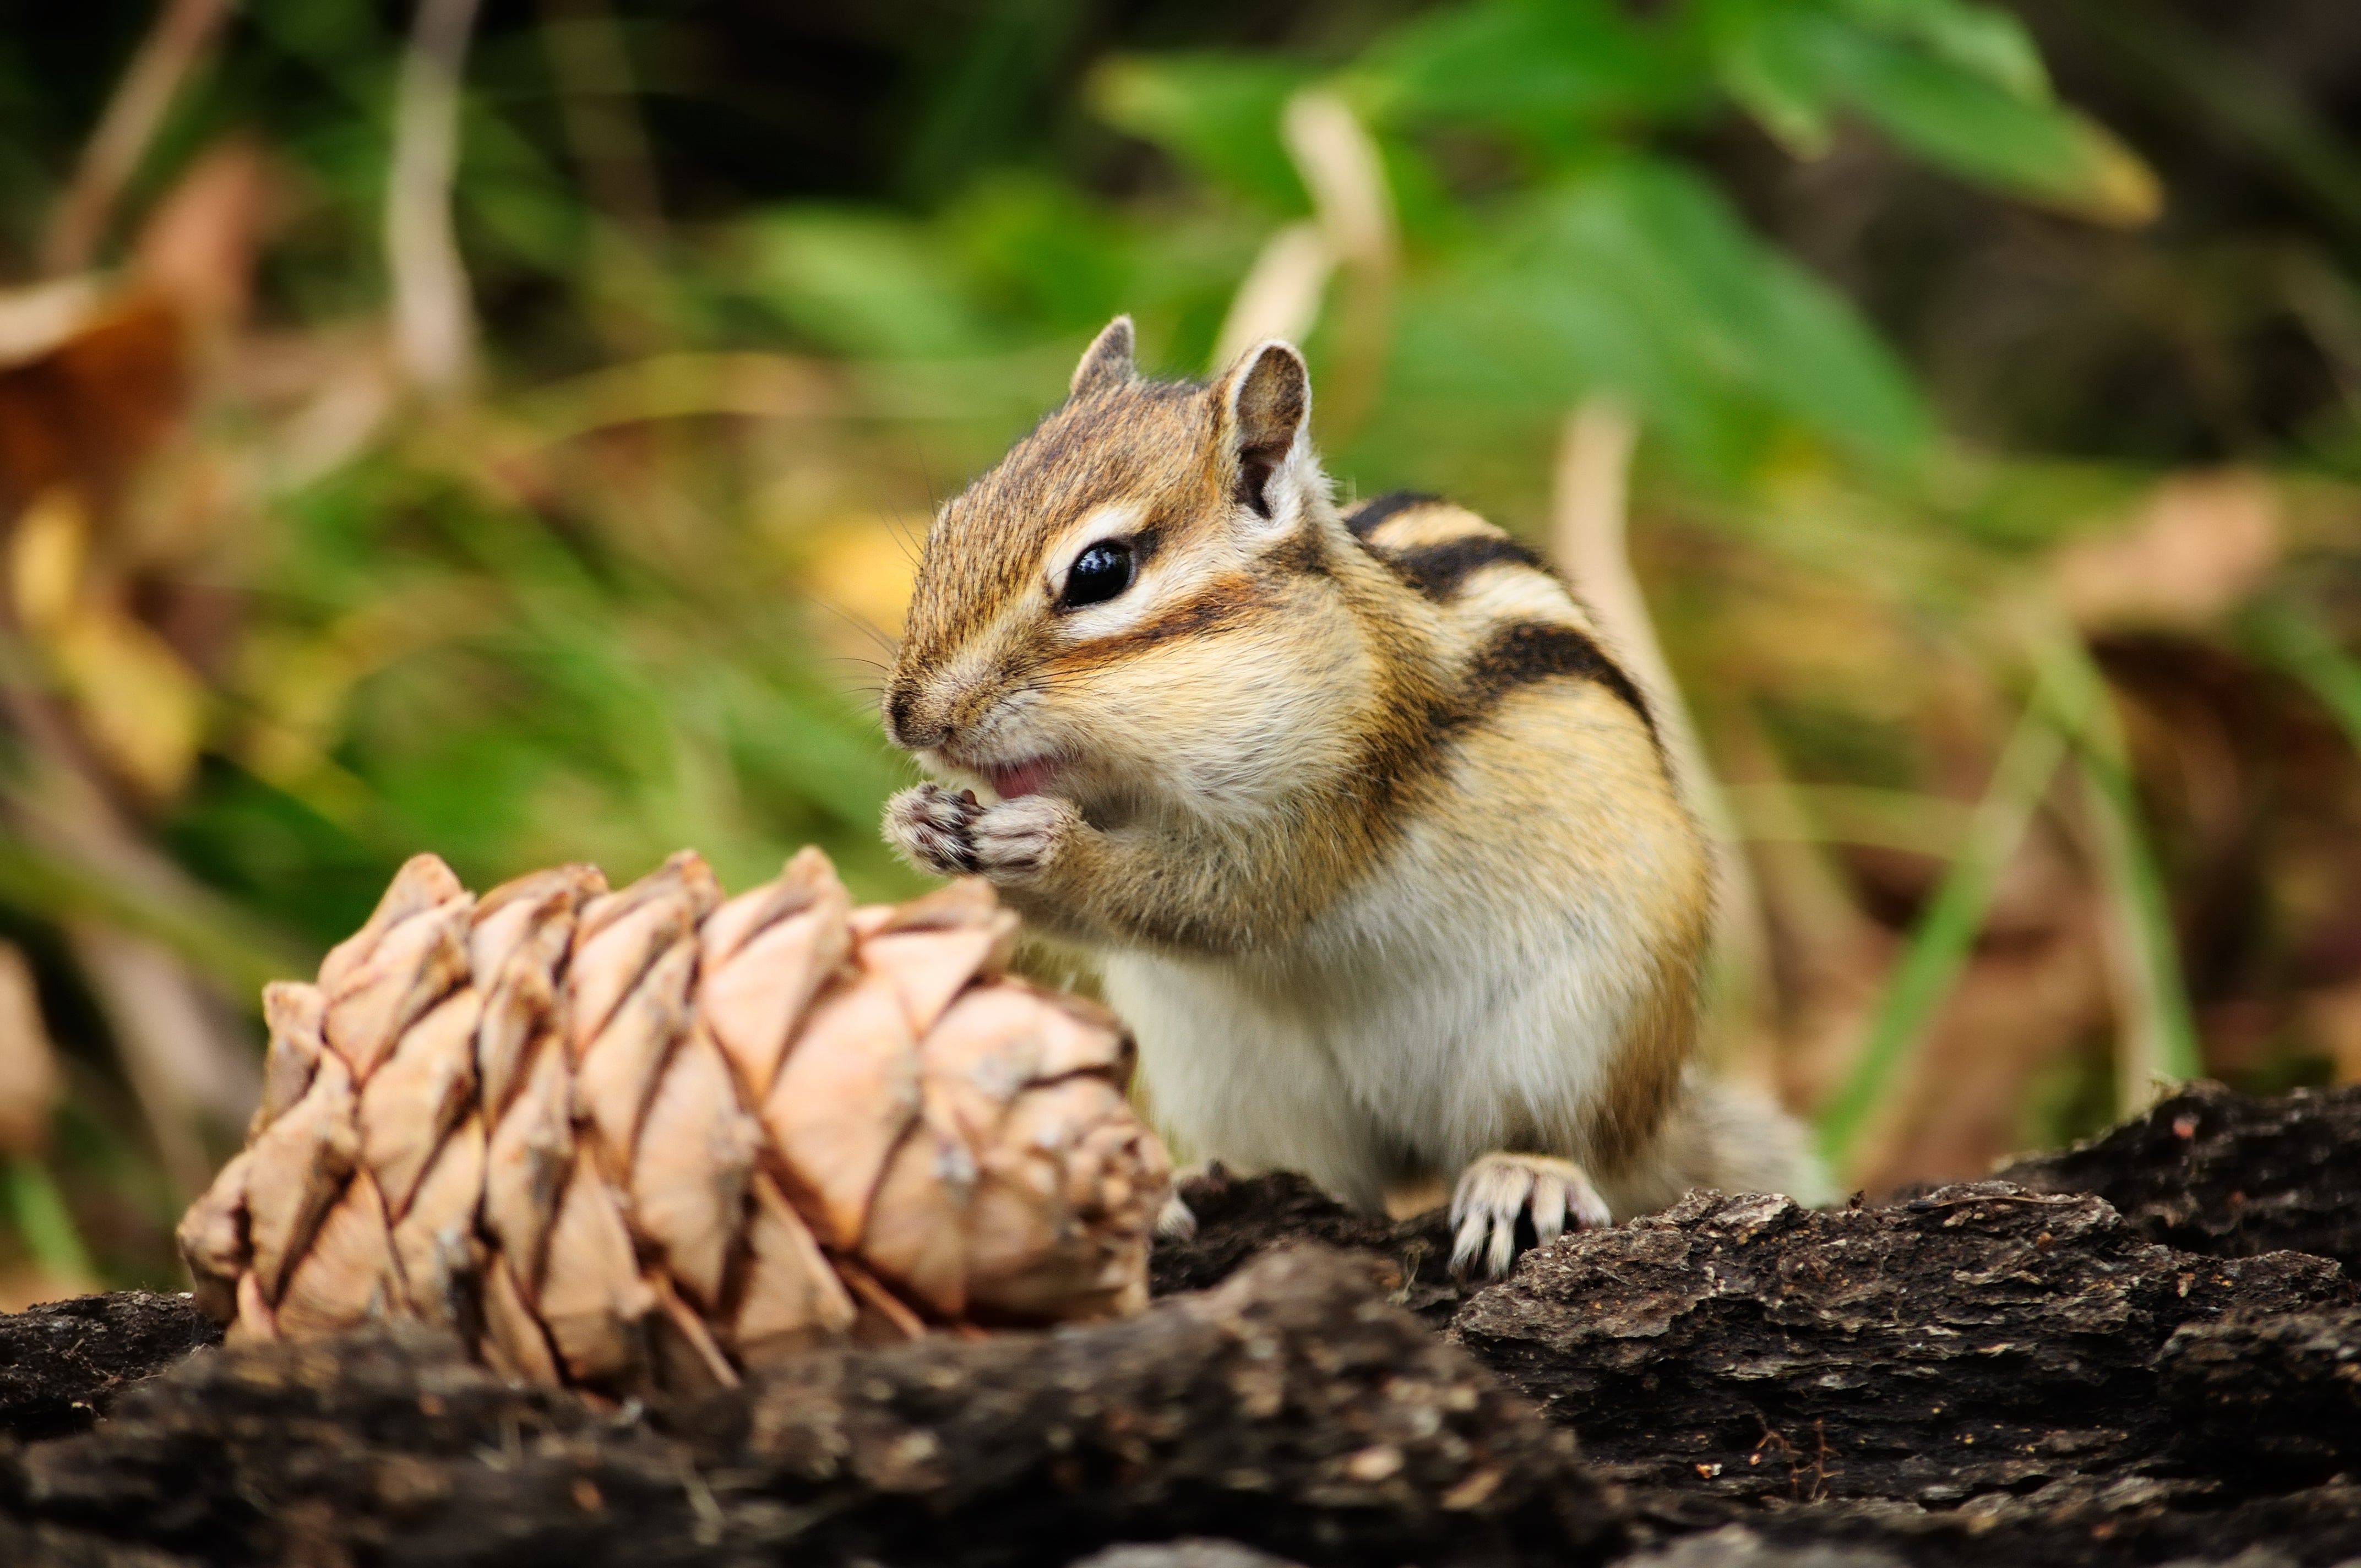 Chipmunks found at California’s Lake Tahoe have been found to be carriers of the plague.